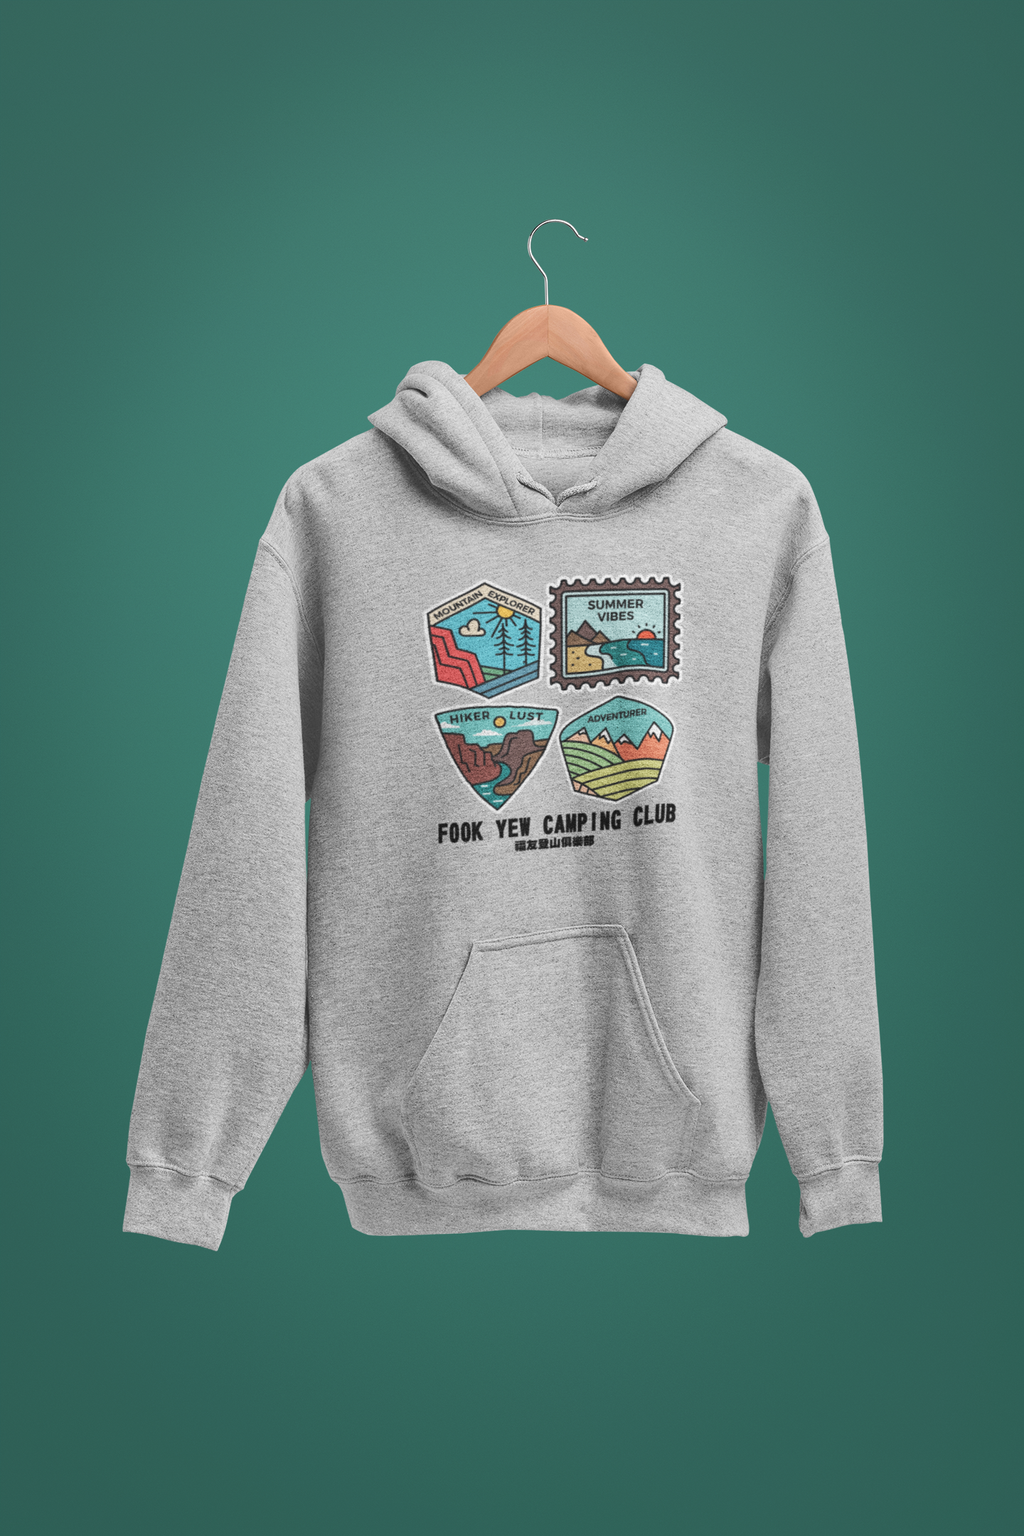 mockup-of-a-hoodie-in-a-hanger-against-a-solid-background-27735.png